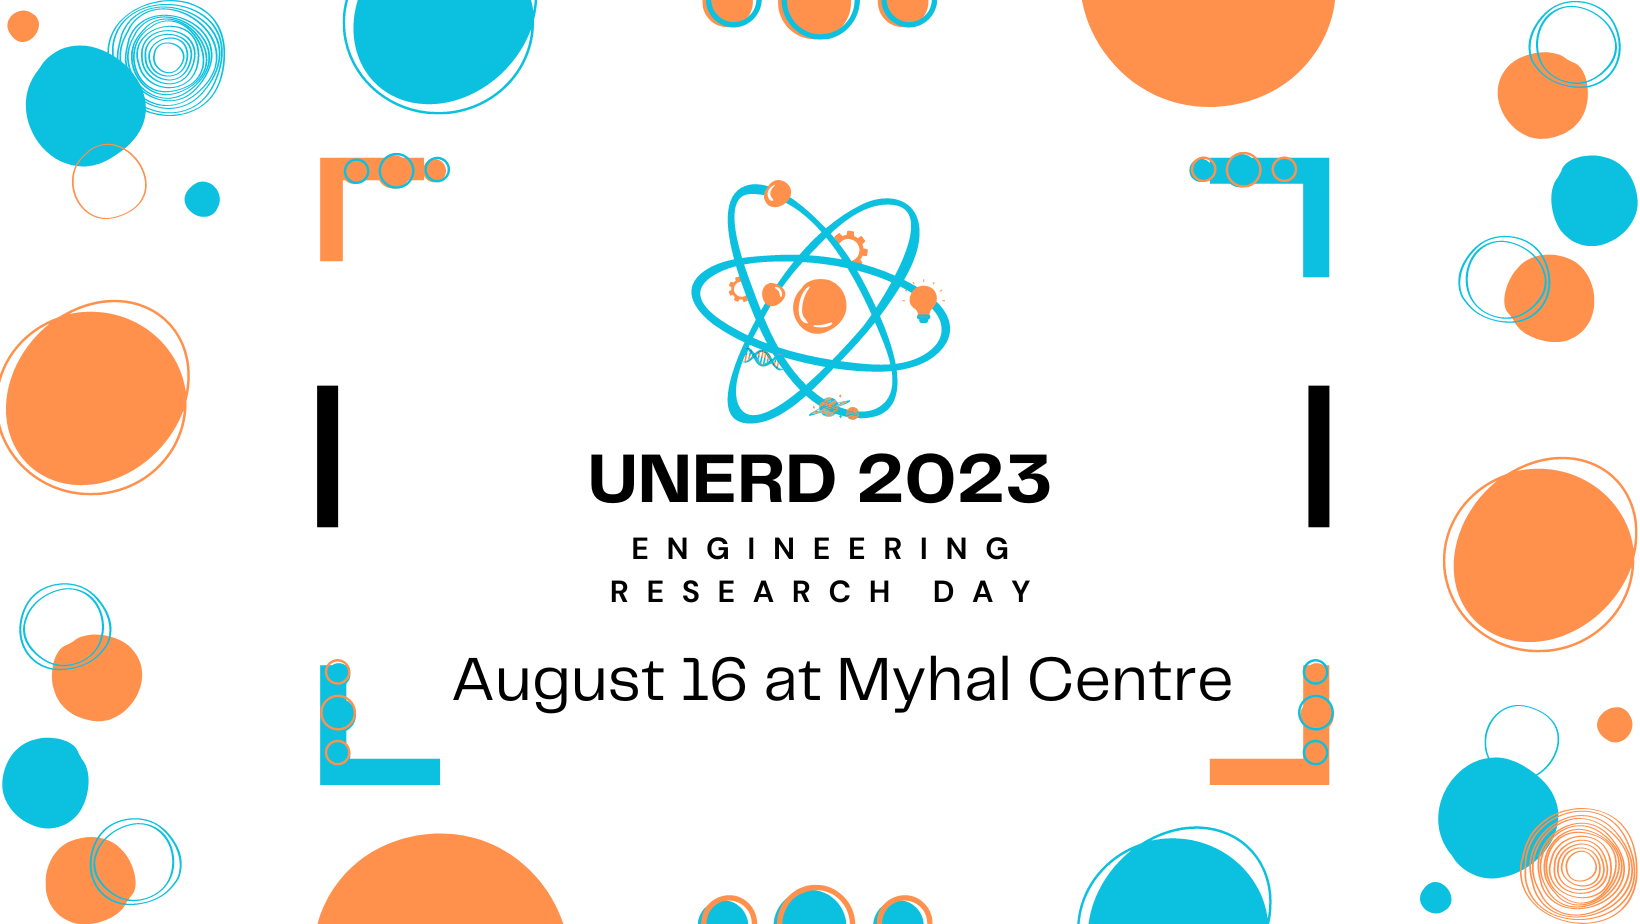 White background with a graphic of a blue and orange atom in the center, along with circles on the sides. Text reads: UNERD 2023 Engineering Research Day. August 16 at Myhal Centre.